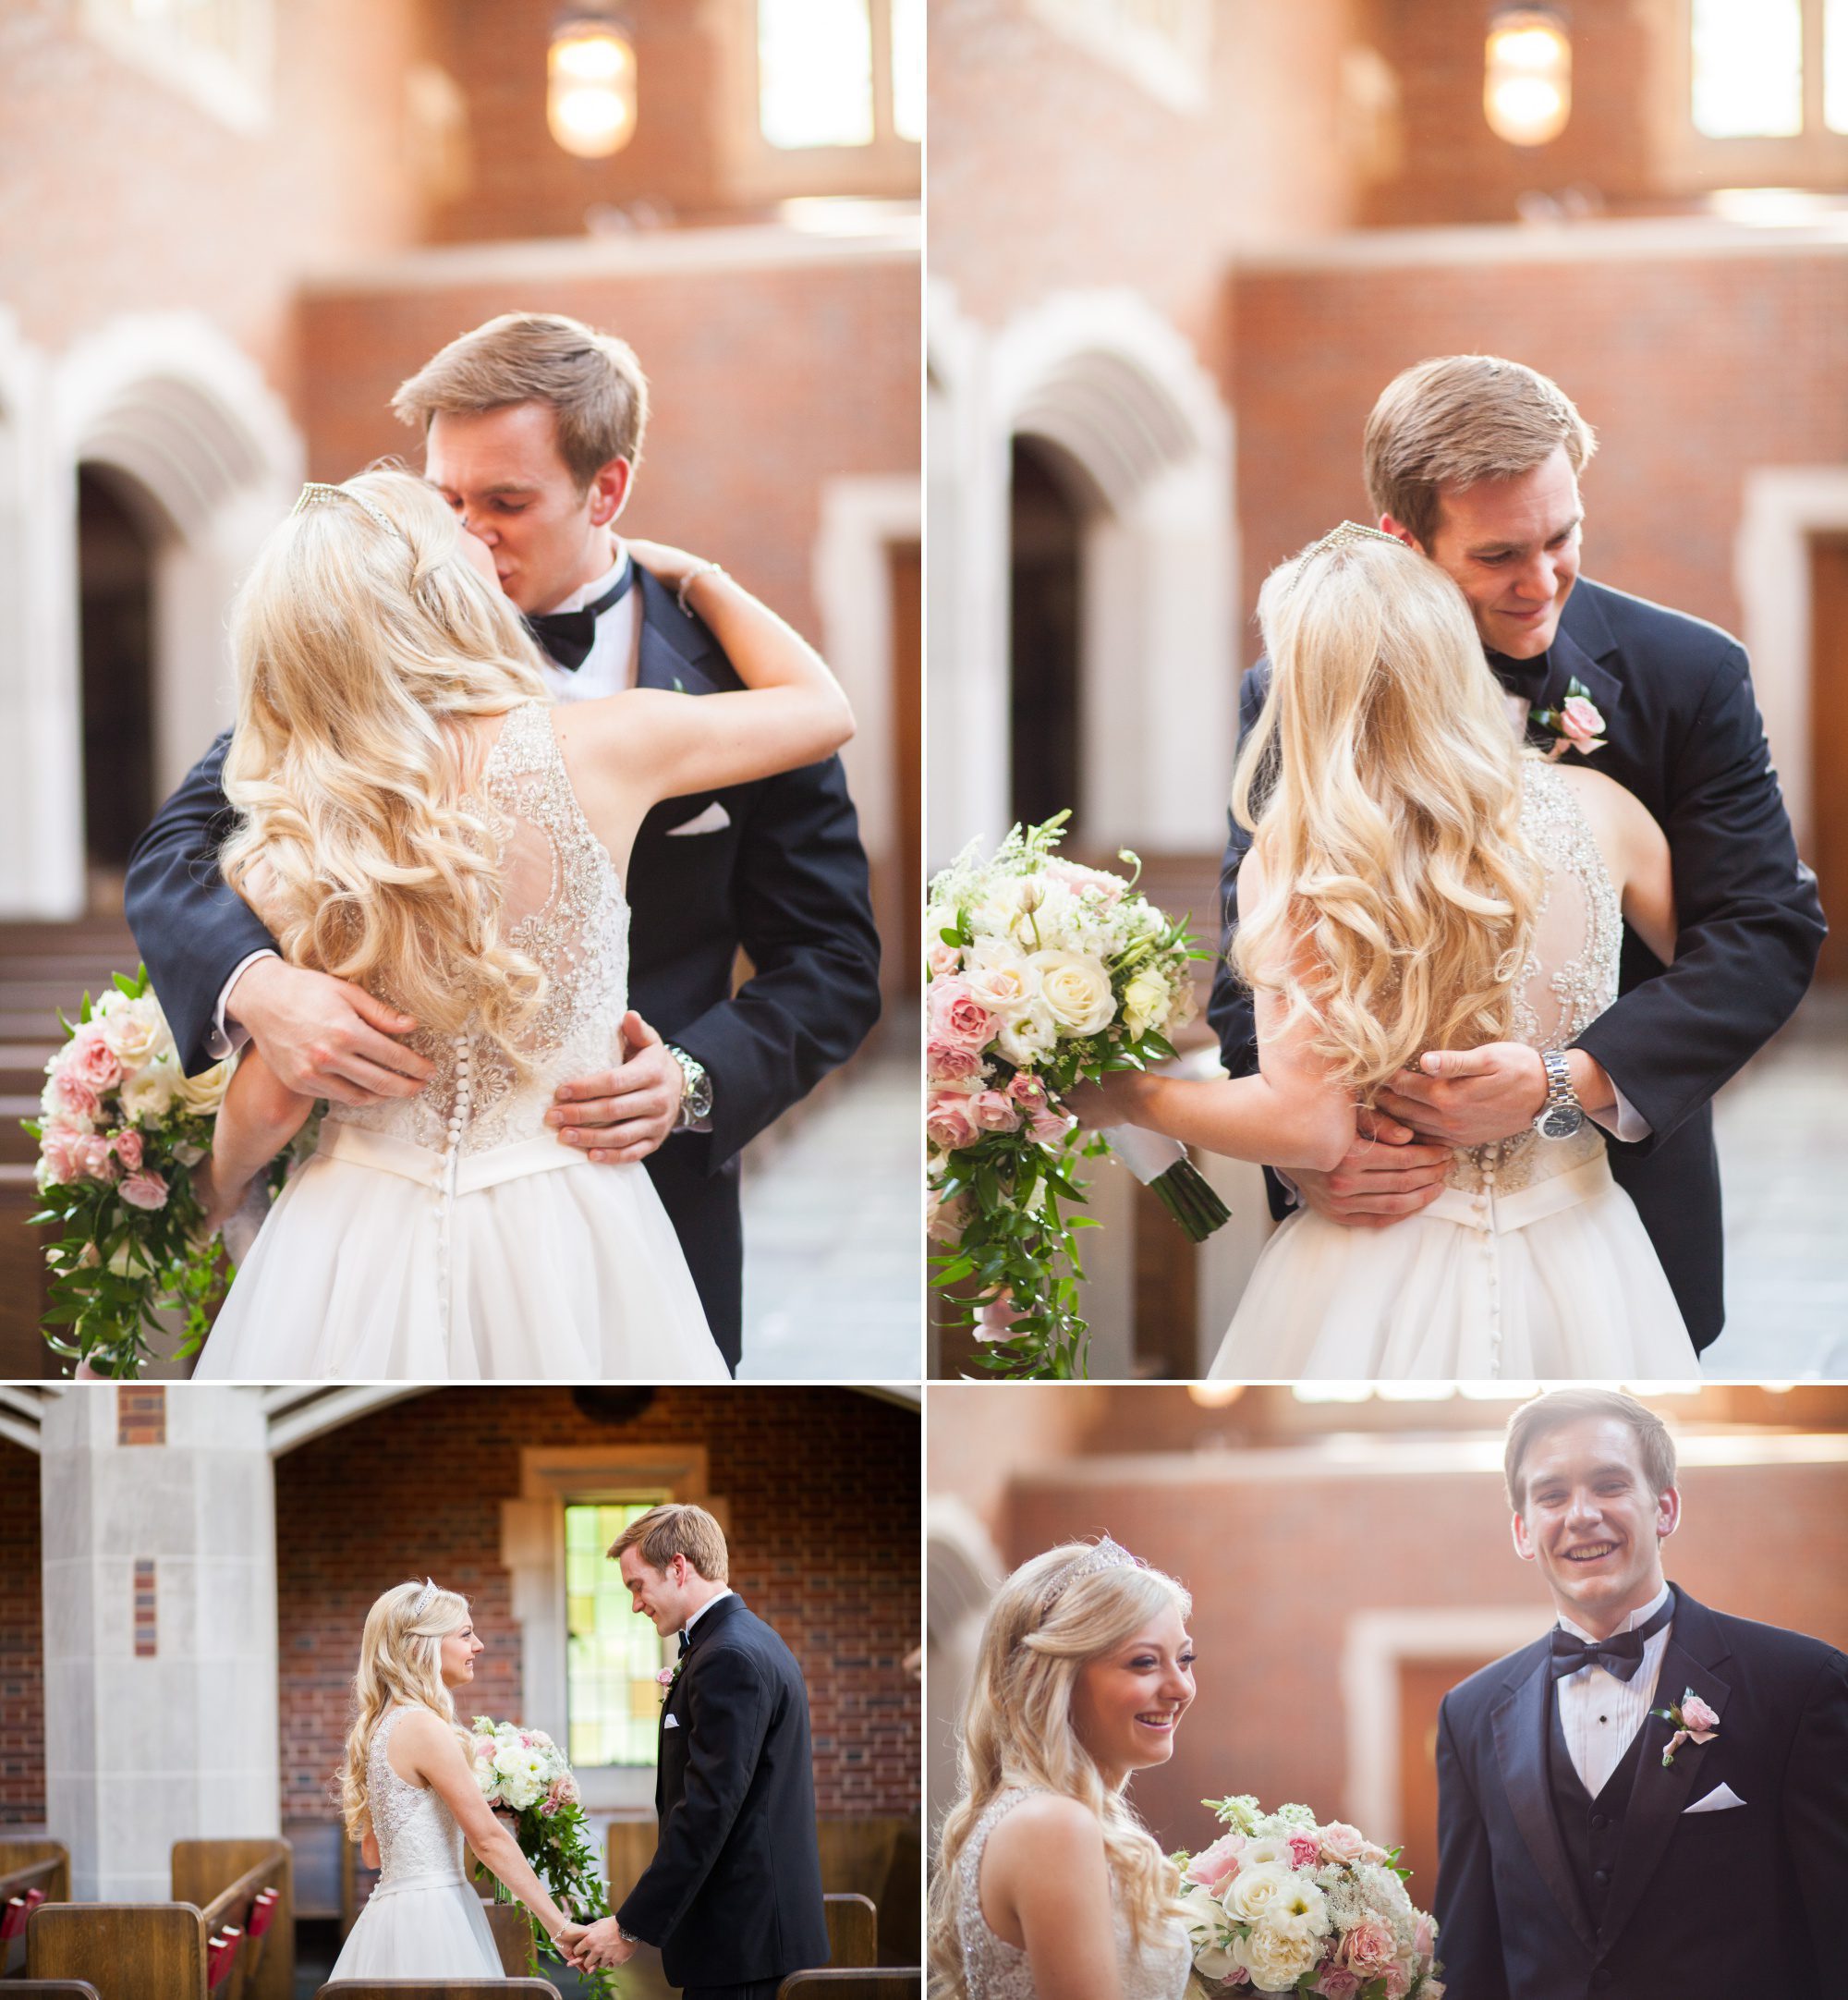 Bride and groom share a private moment before wedding ceremony - Wightman Chapel at Scarritt Bennett before summer wedding ceremony in Nashville, TN. Photography by Krista Lee Photography.